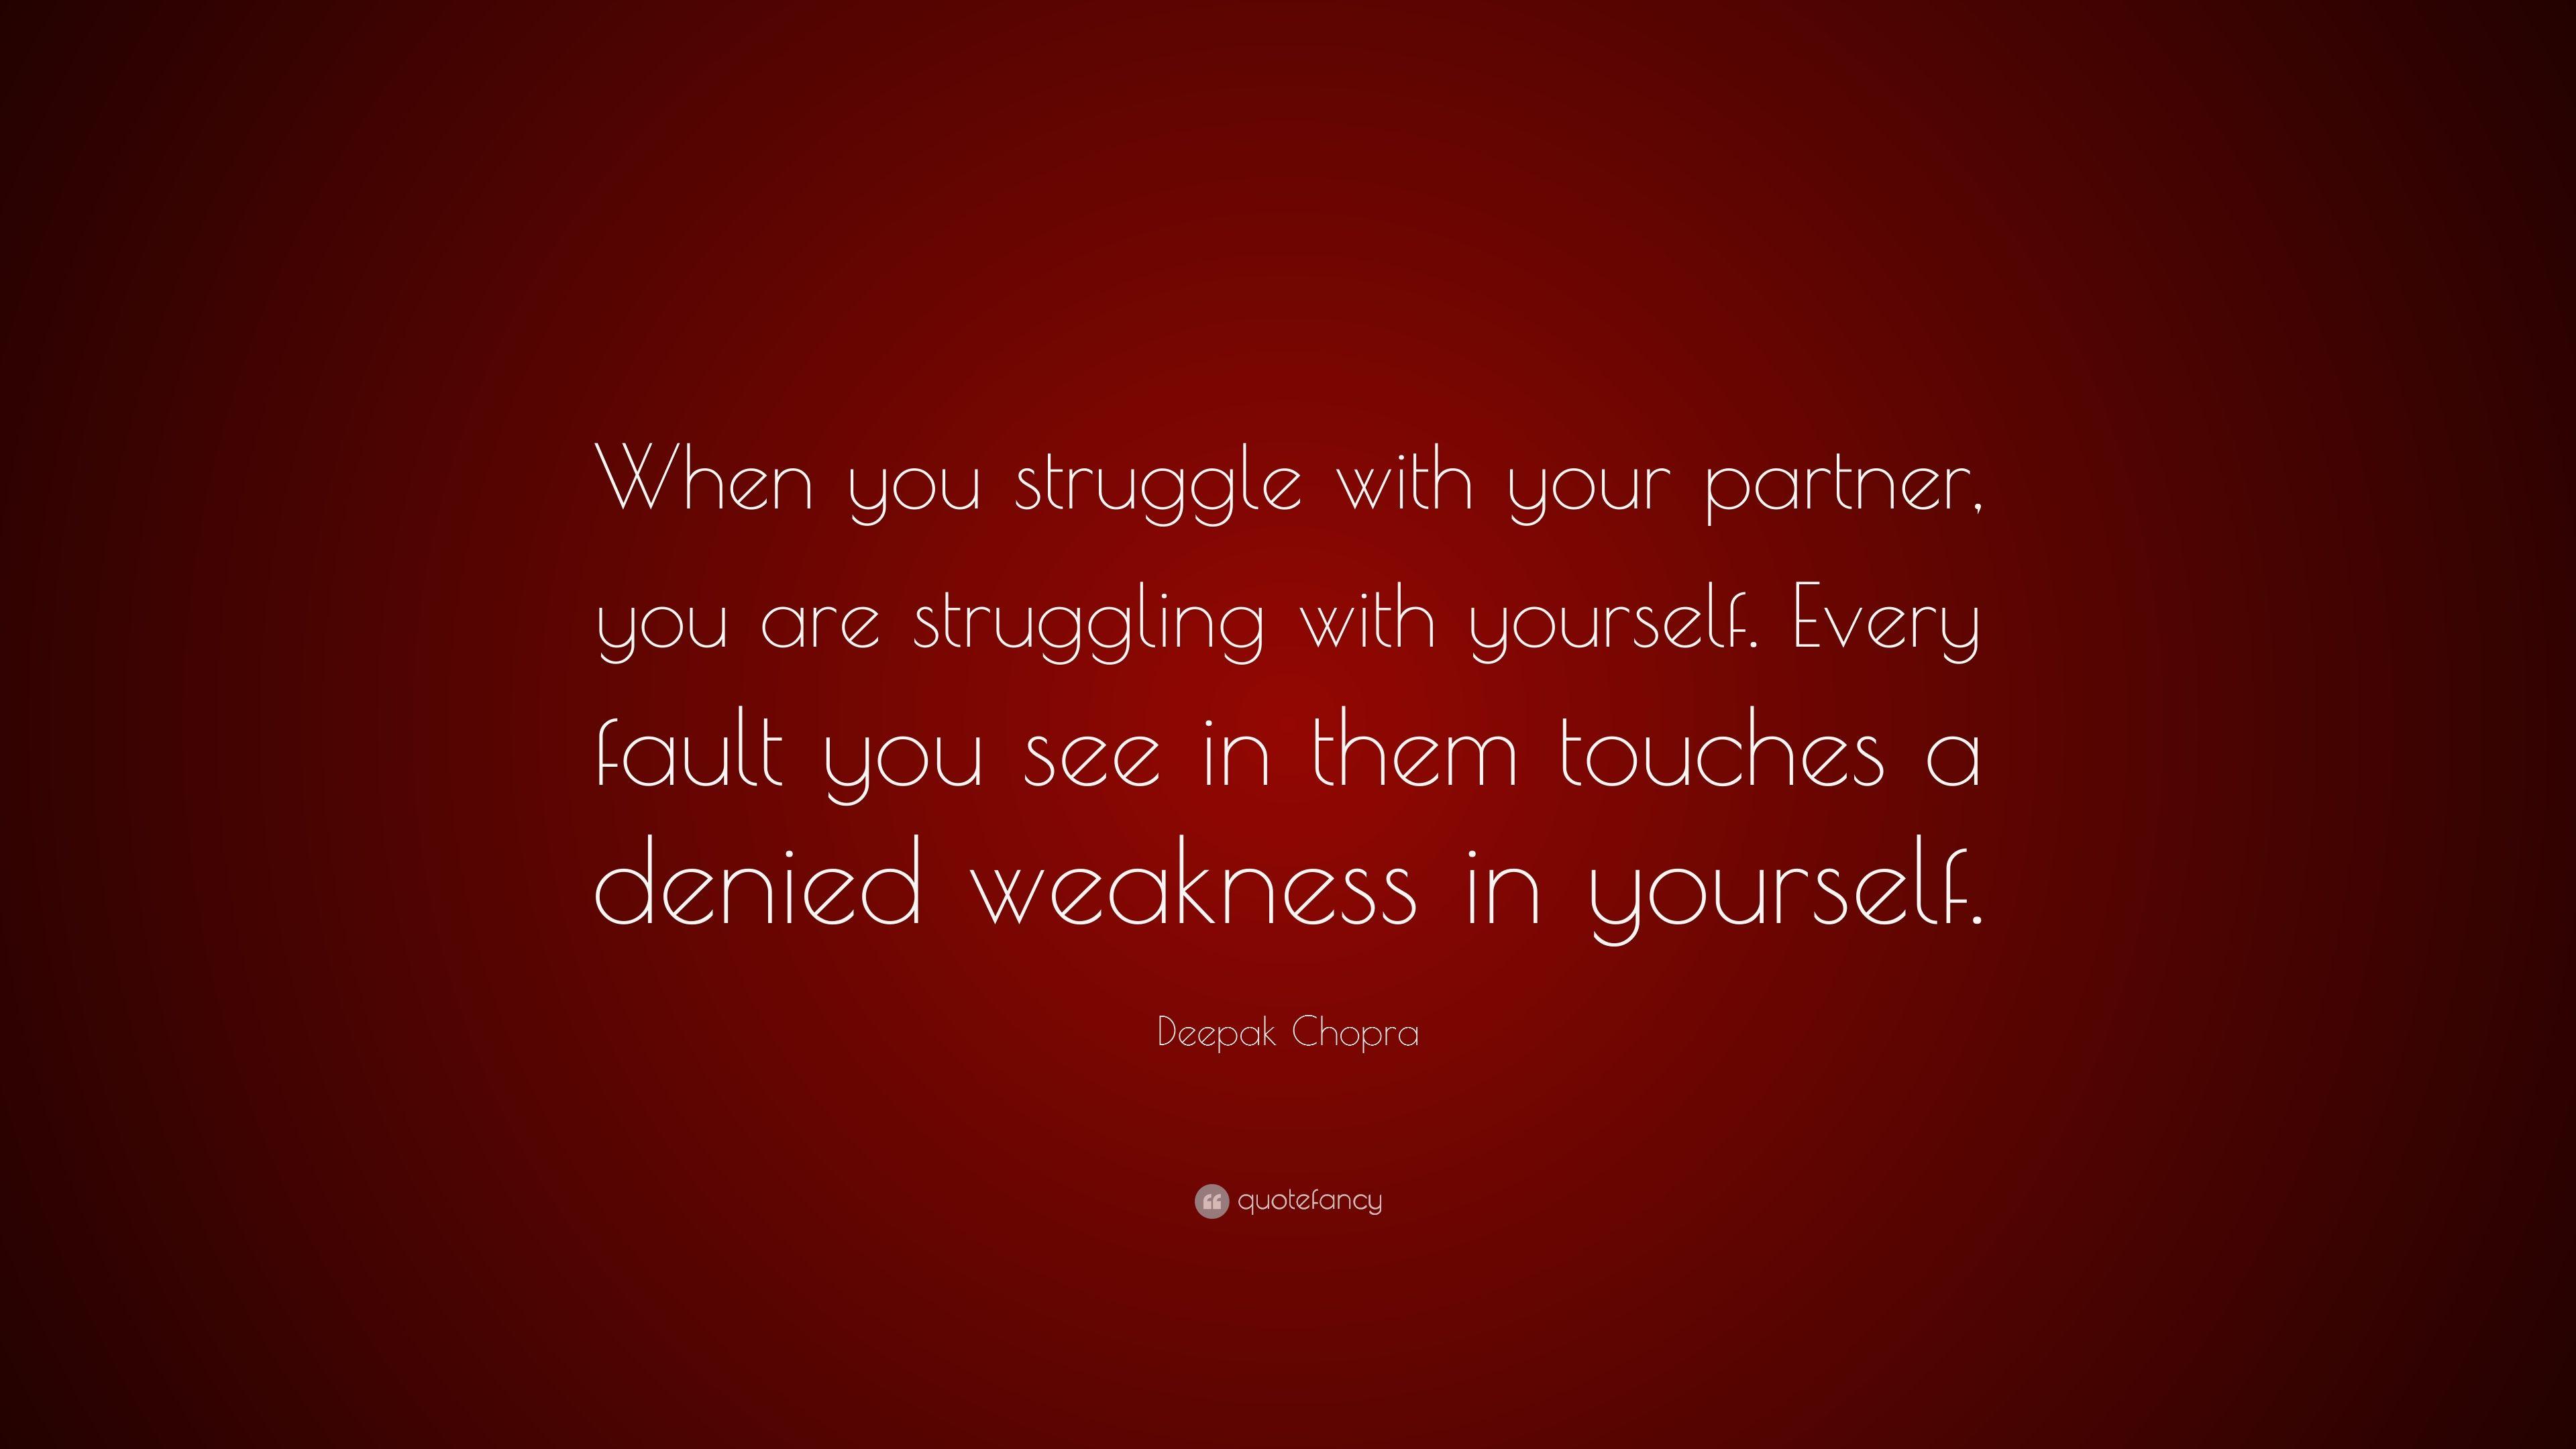 Deepak Chopra Quote: “When you struggle with your partner, you are